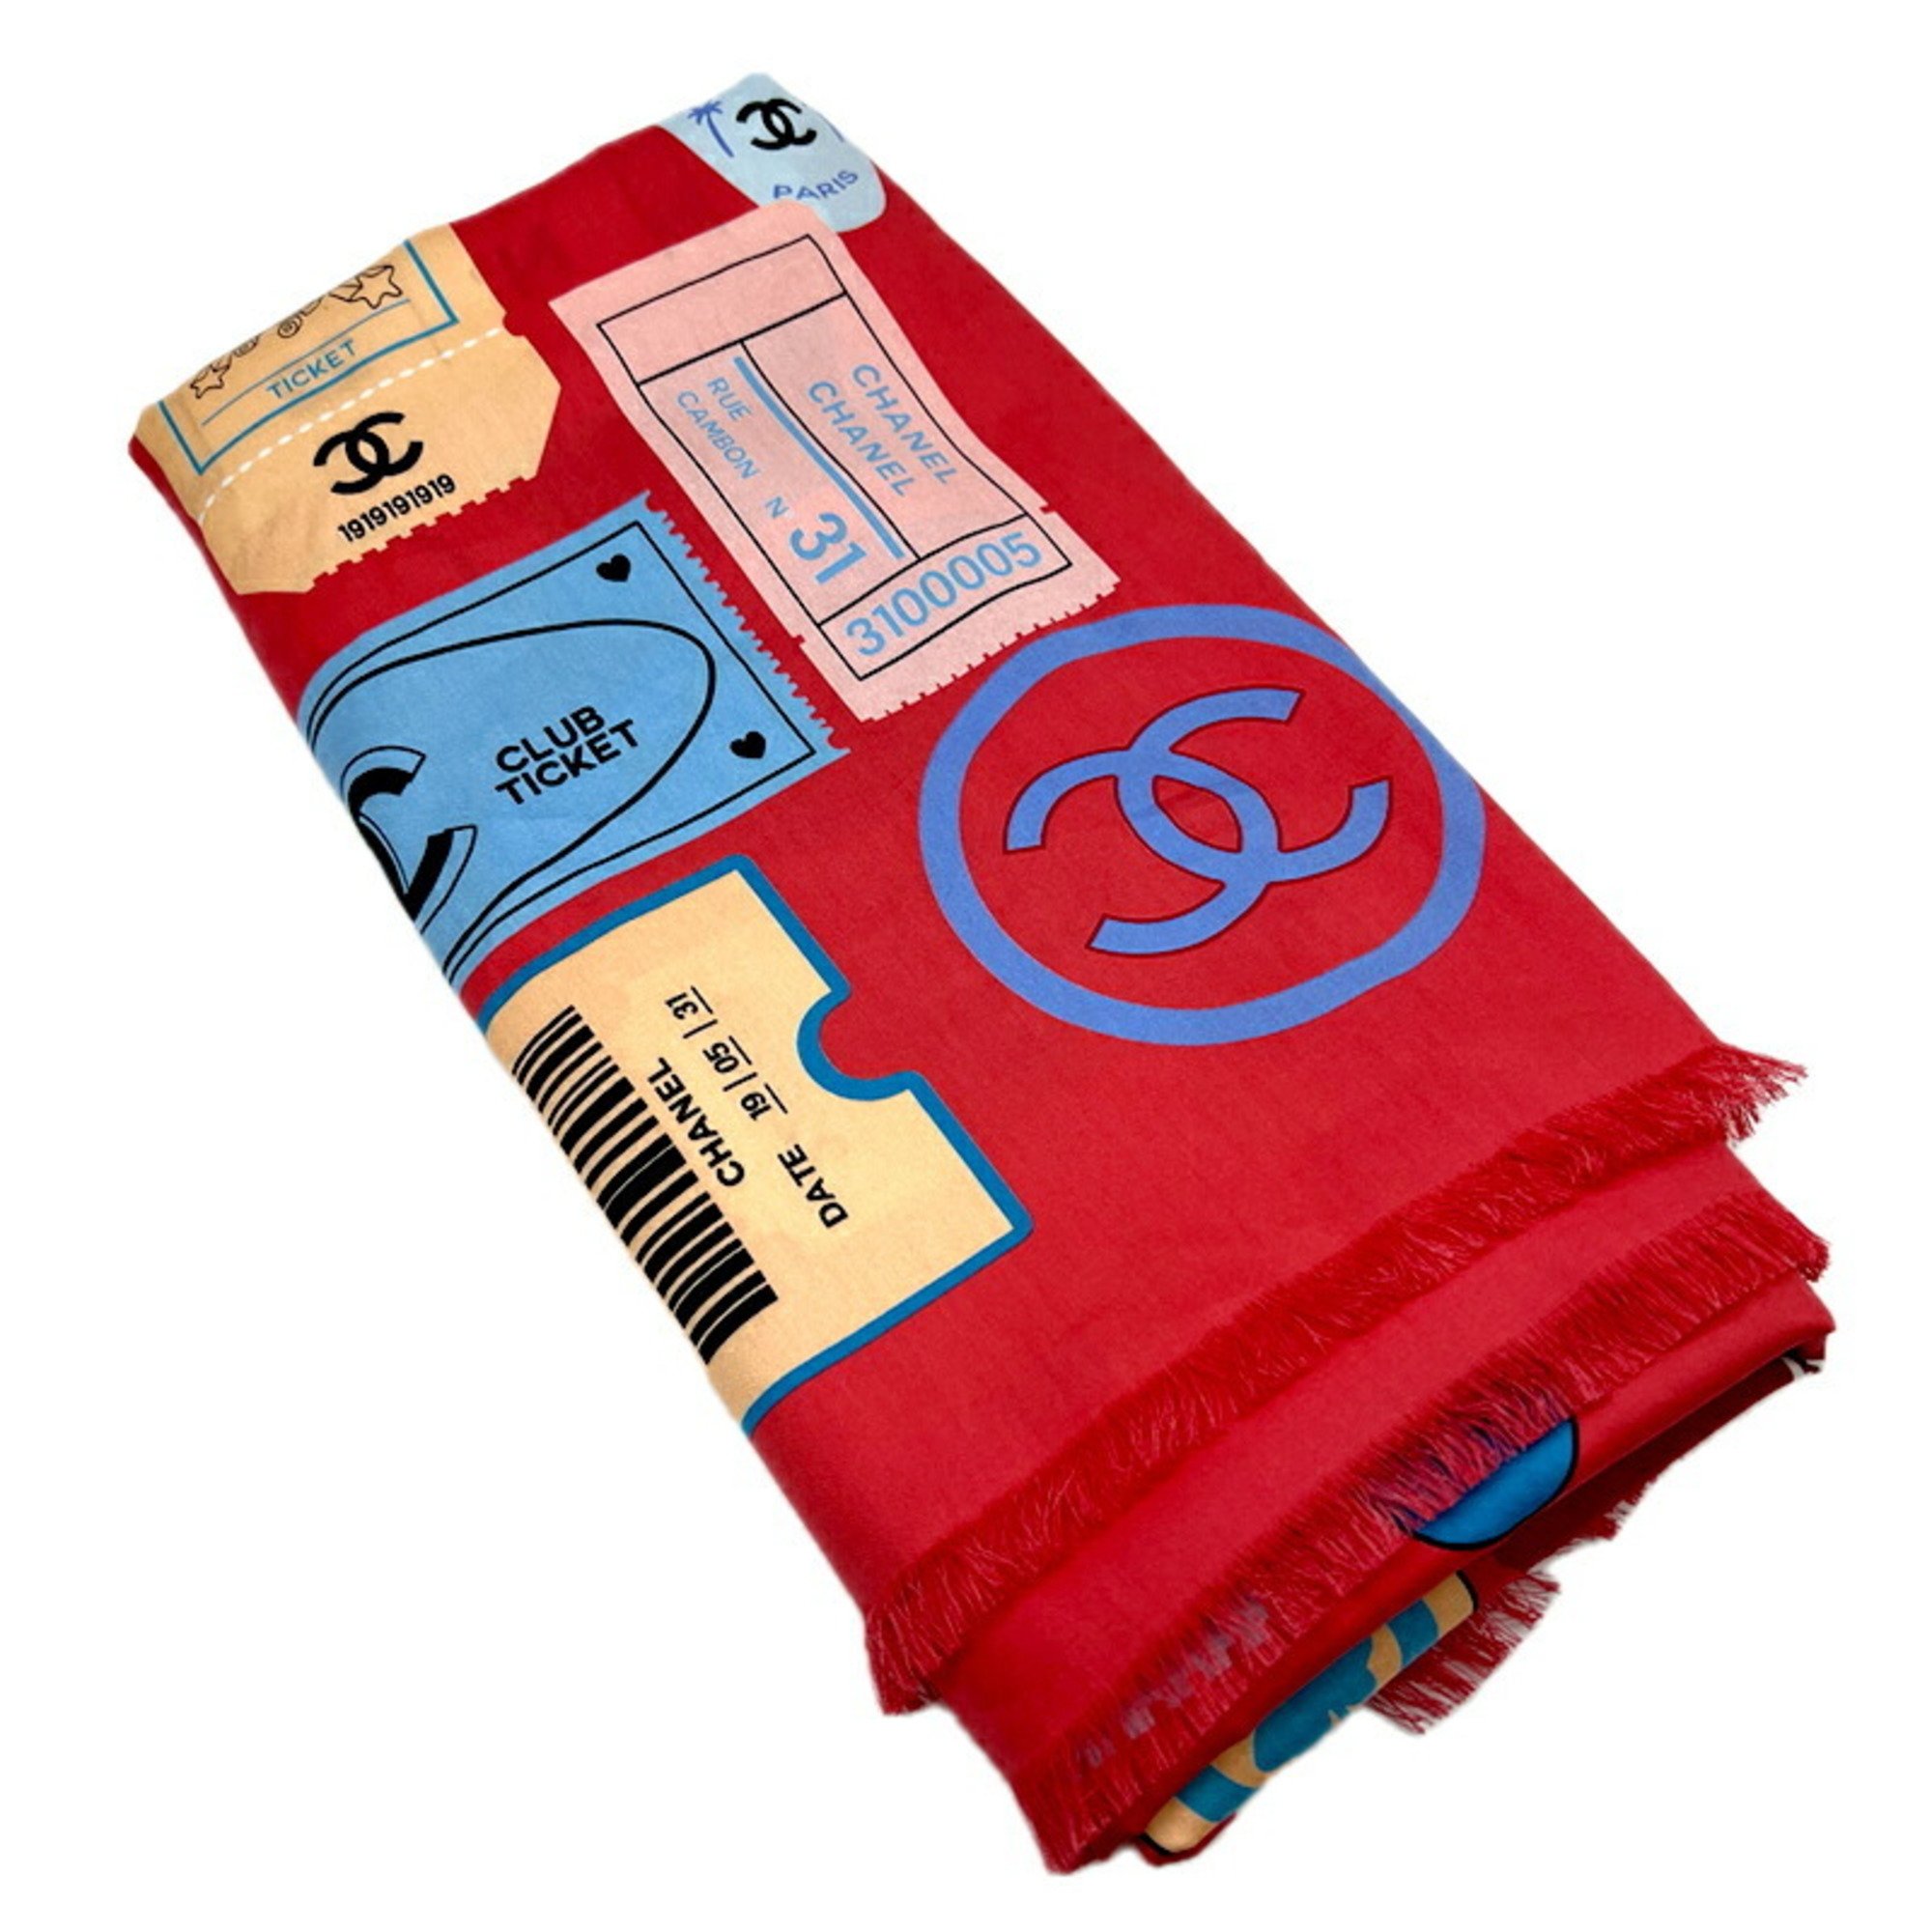 CHANEL Chanel Ticket Design Large Stole Cotton Silk Red Pink Scarf Shawl Women's Coco Mark Men's